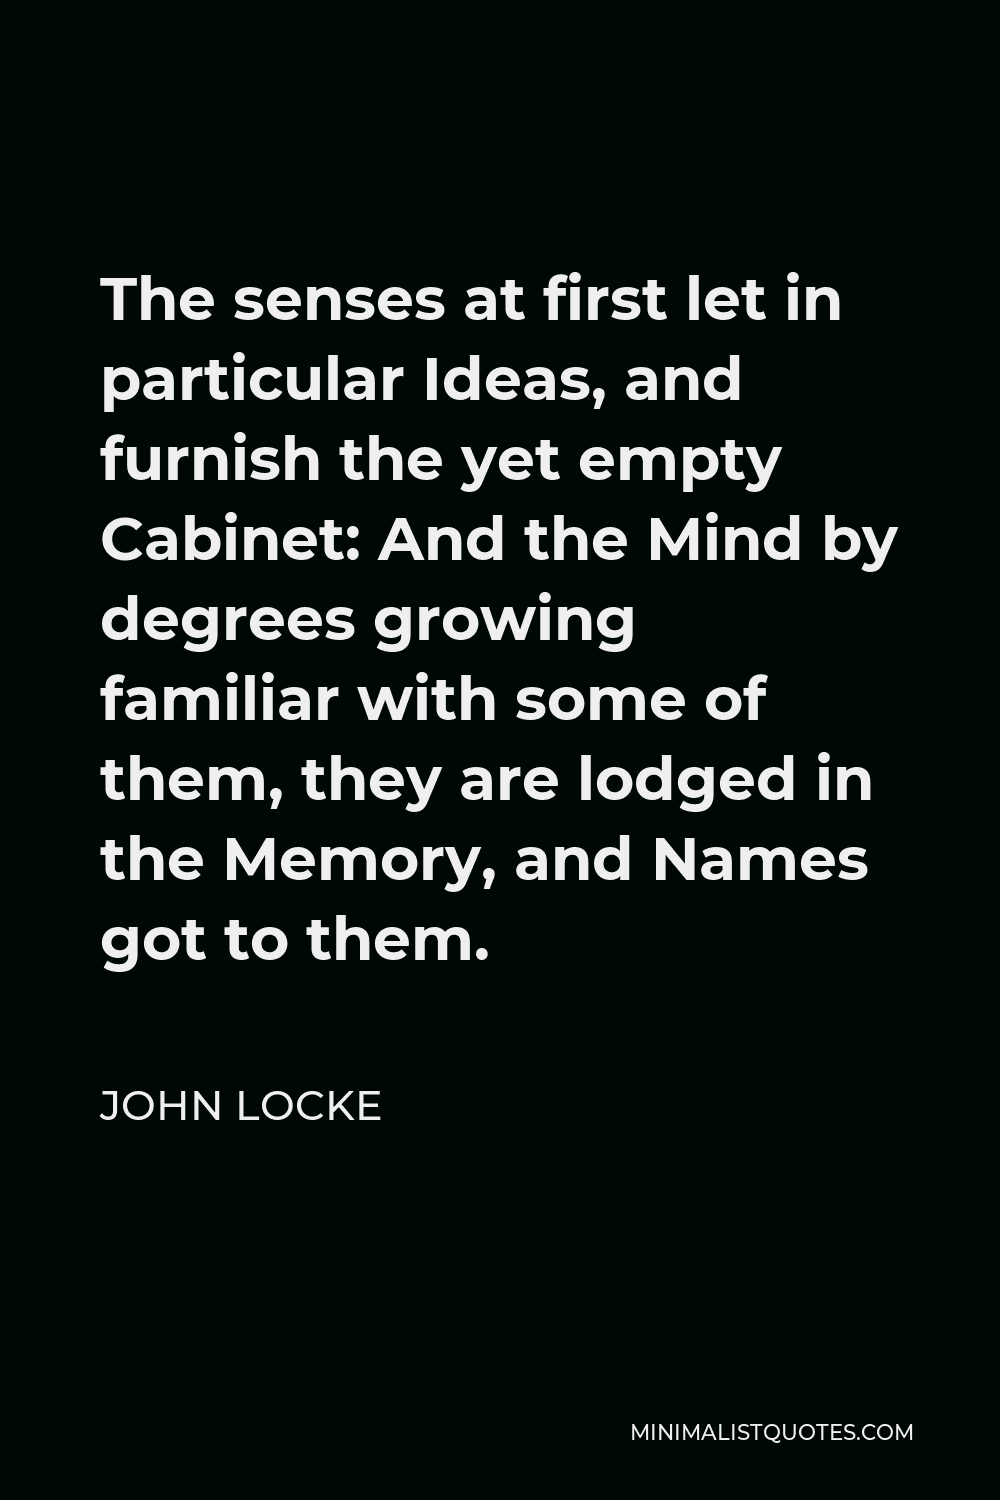 John Locke Quote - The senses at first let in particular Ideas, and furnish the yet empty Cabinet: And the Mind by degrees growing familiar with some of them, they are lodged in the Memory, and Names got to them.